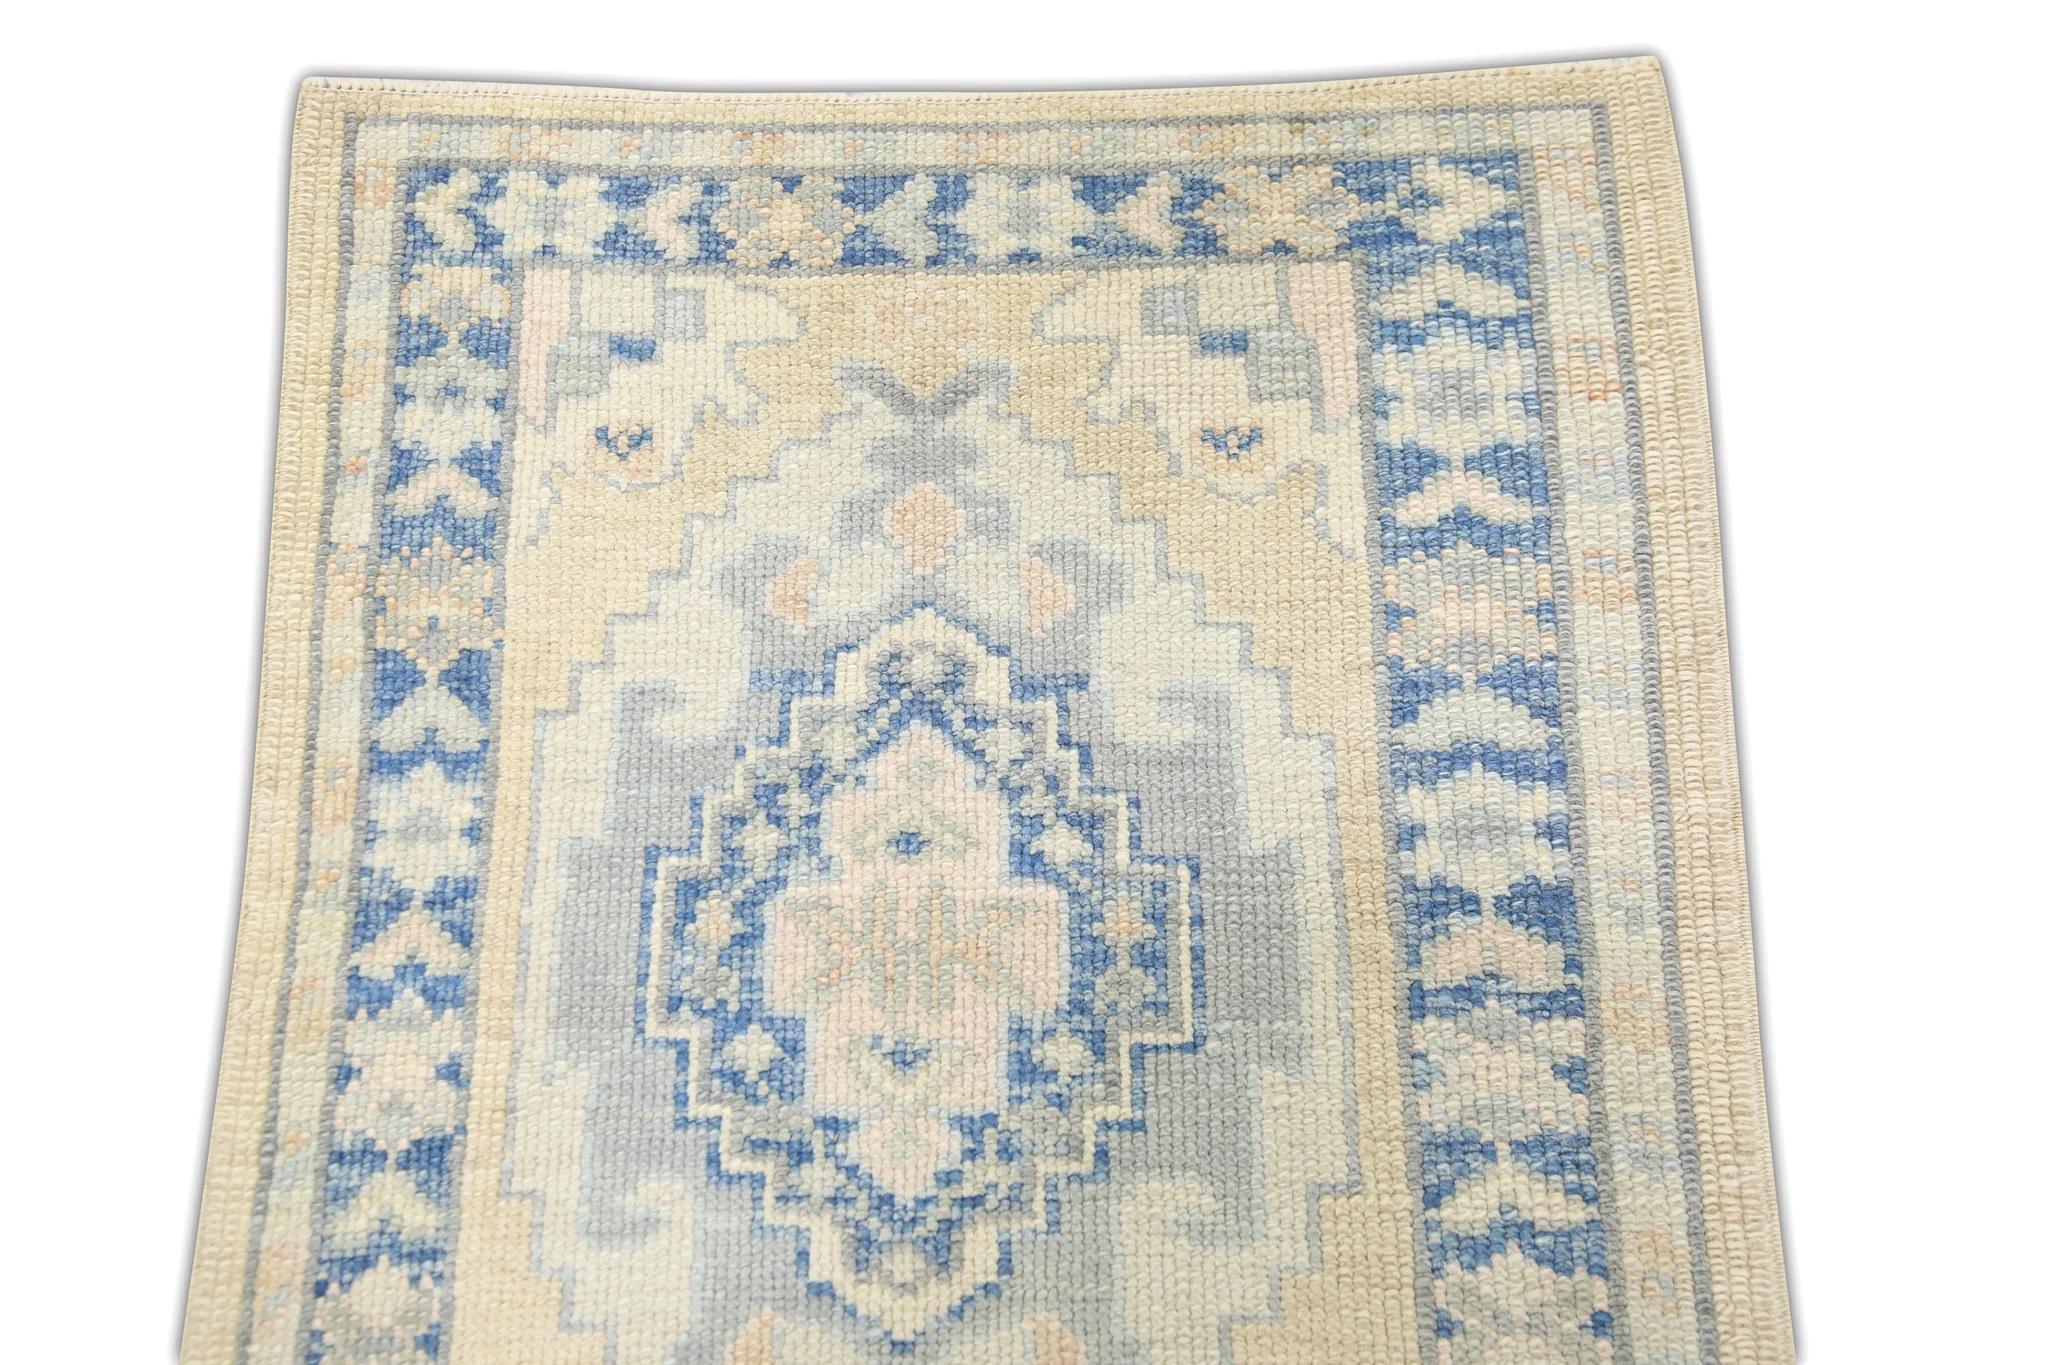 Vegetable Dyed Blue and Yellow Geometric Design Handwoven Wool Turkish Oushak Rug 2'3